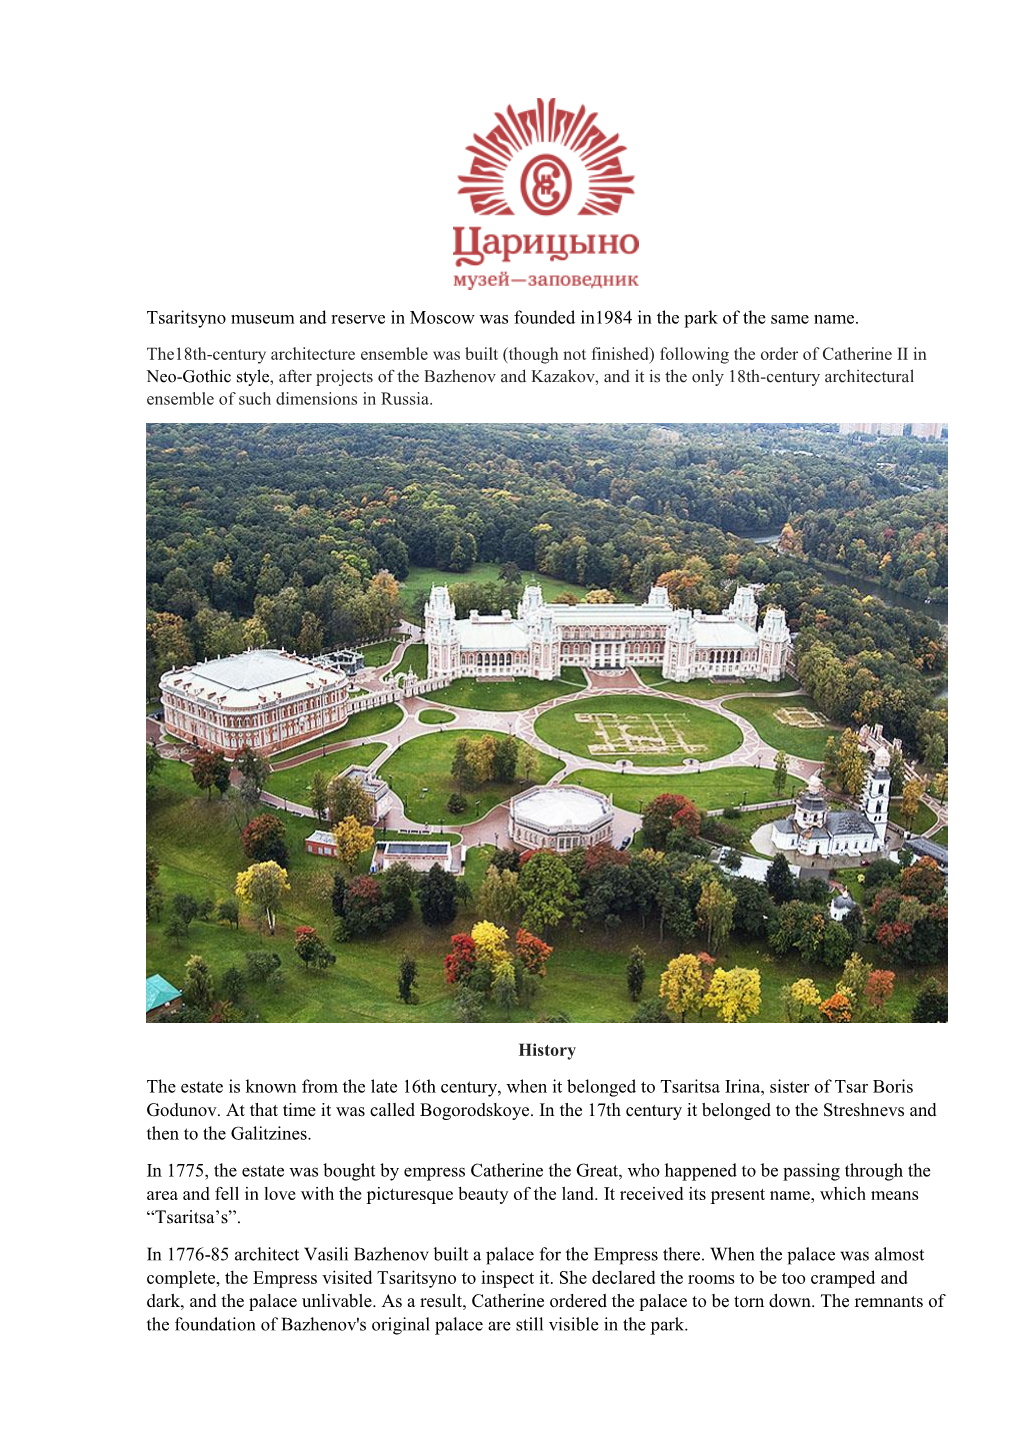 Tsaritsyno Museum and Reserve in Moscow Was Founded In1984 in the Park of the Same Name